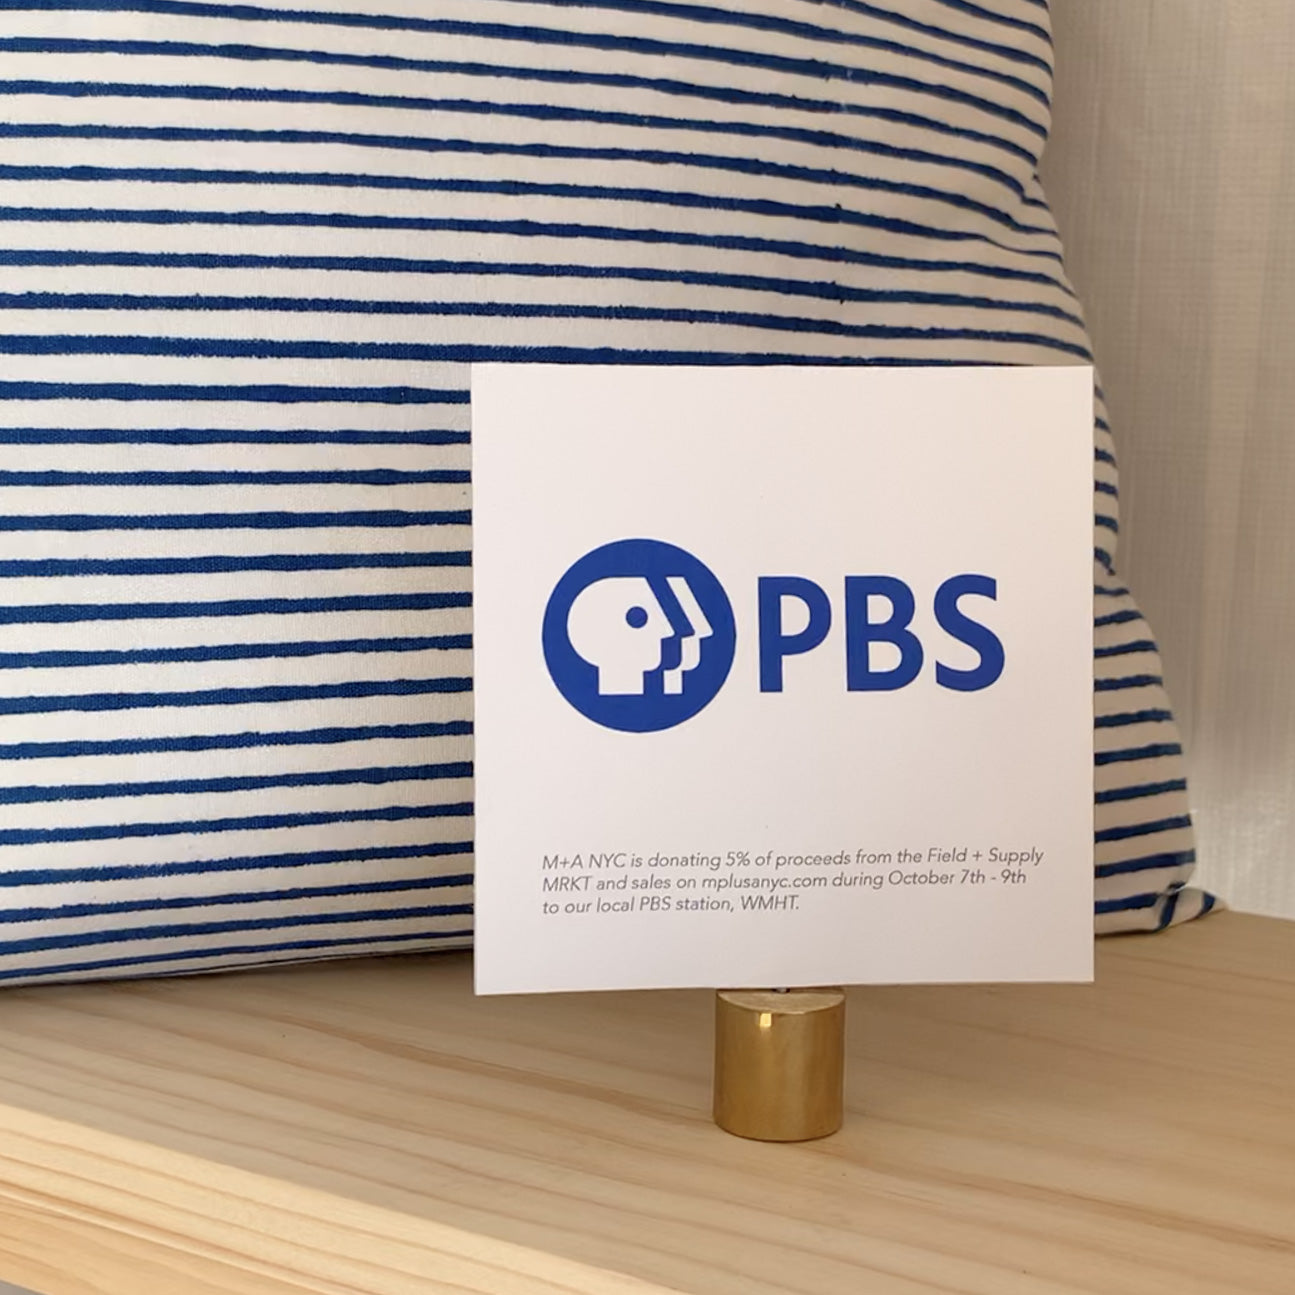 Donating 5% of Proceeds Again to PBS...